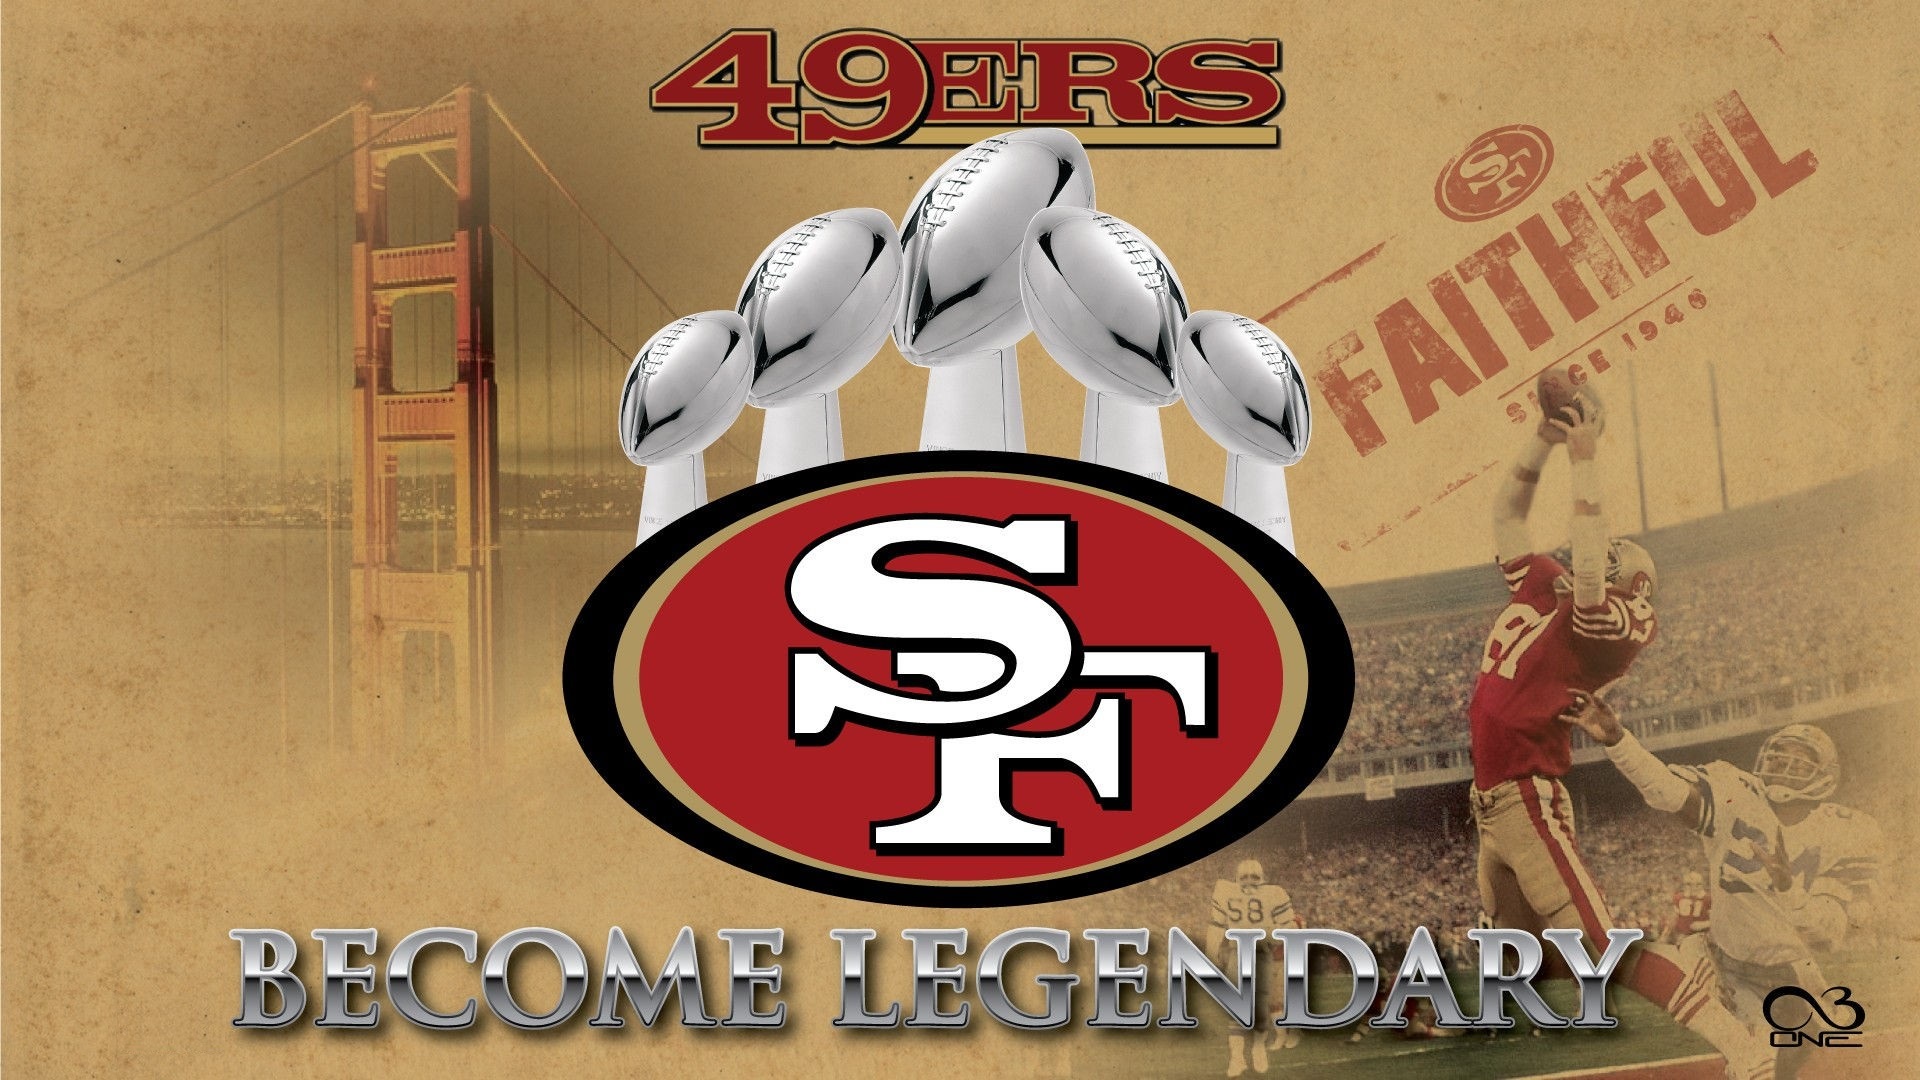 San Francisco 49ers Wallpaper For Mac Backgrounds with high-resolution 1920x1080 pixel. You can use this wallpaper for your Mac or Windows Desktop Background, iPhone, Android or Tablet and another Smartphone device